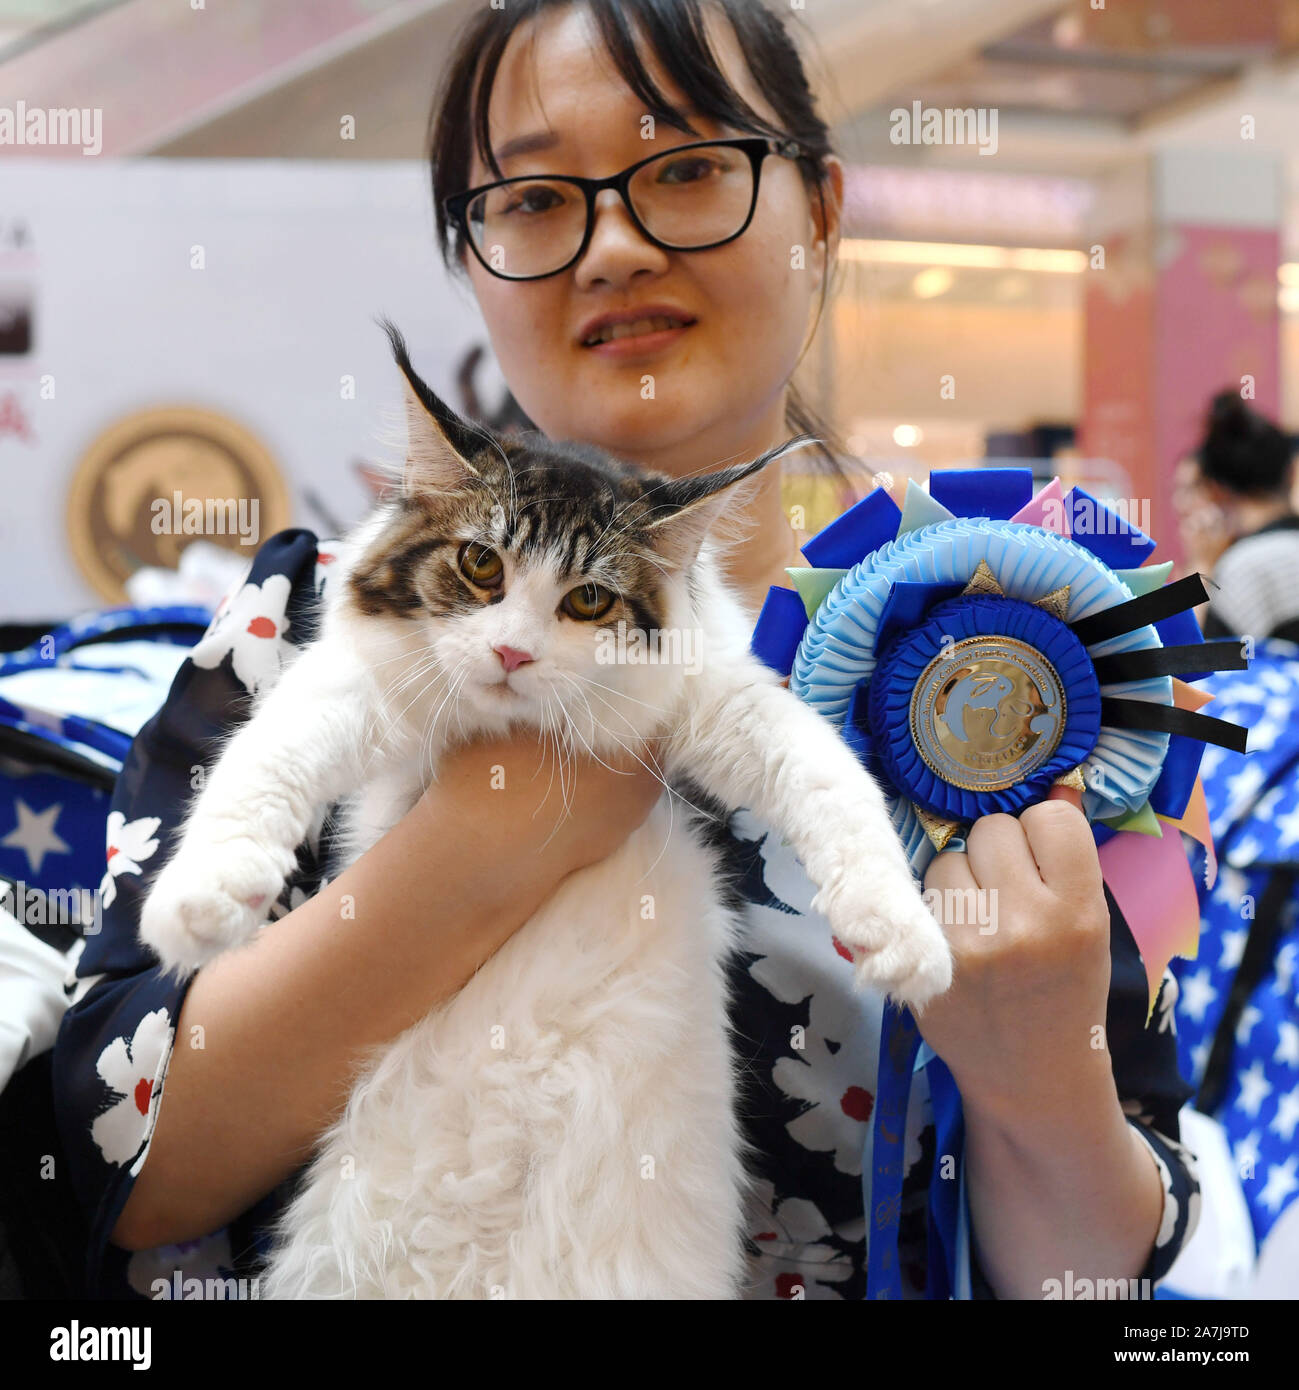 A Cat Owner Shoes A Cat And A Medal At The Gccfa Cat Show In Nanjing City East China S Jiangsu Province 7 September 2019 Stock Photo Alamy